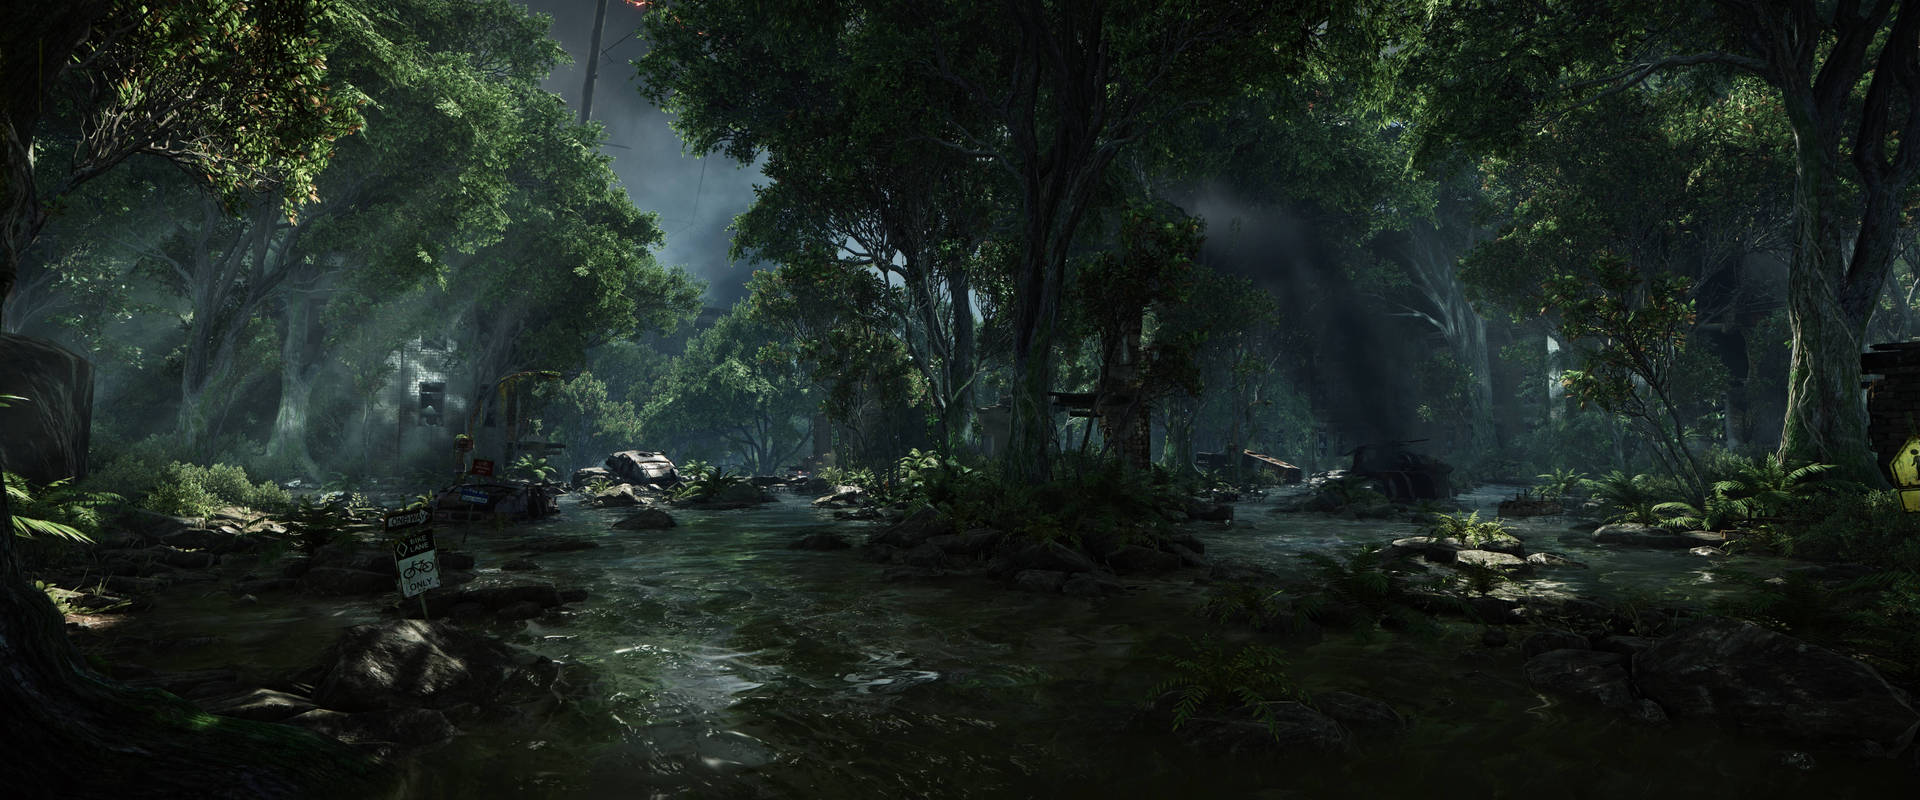 Dual Monitor Crysis Forest Background